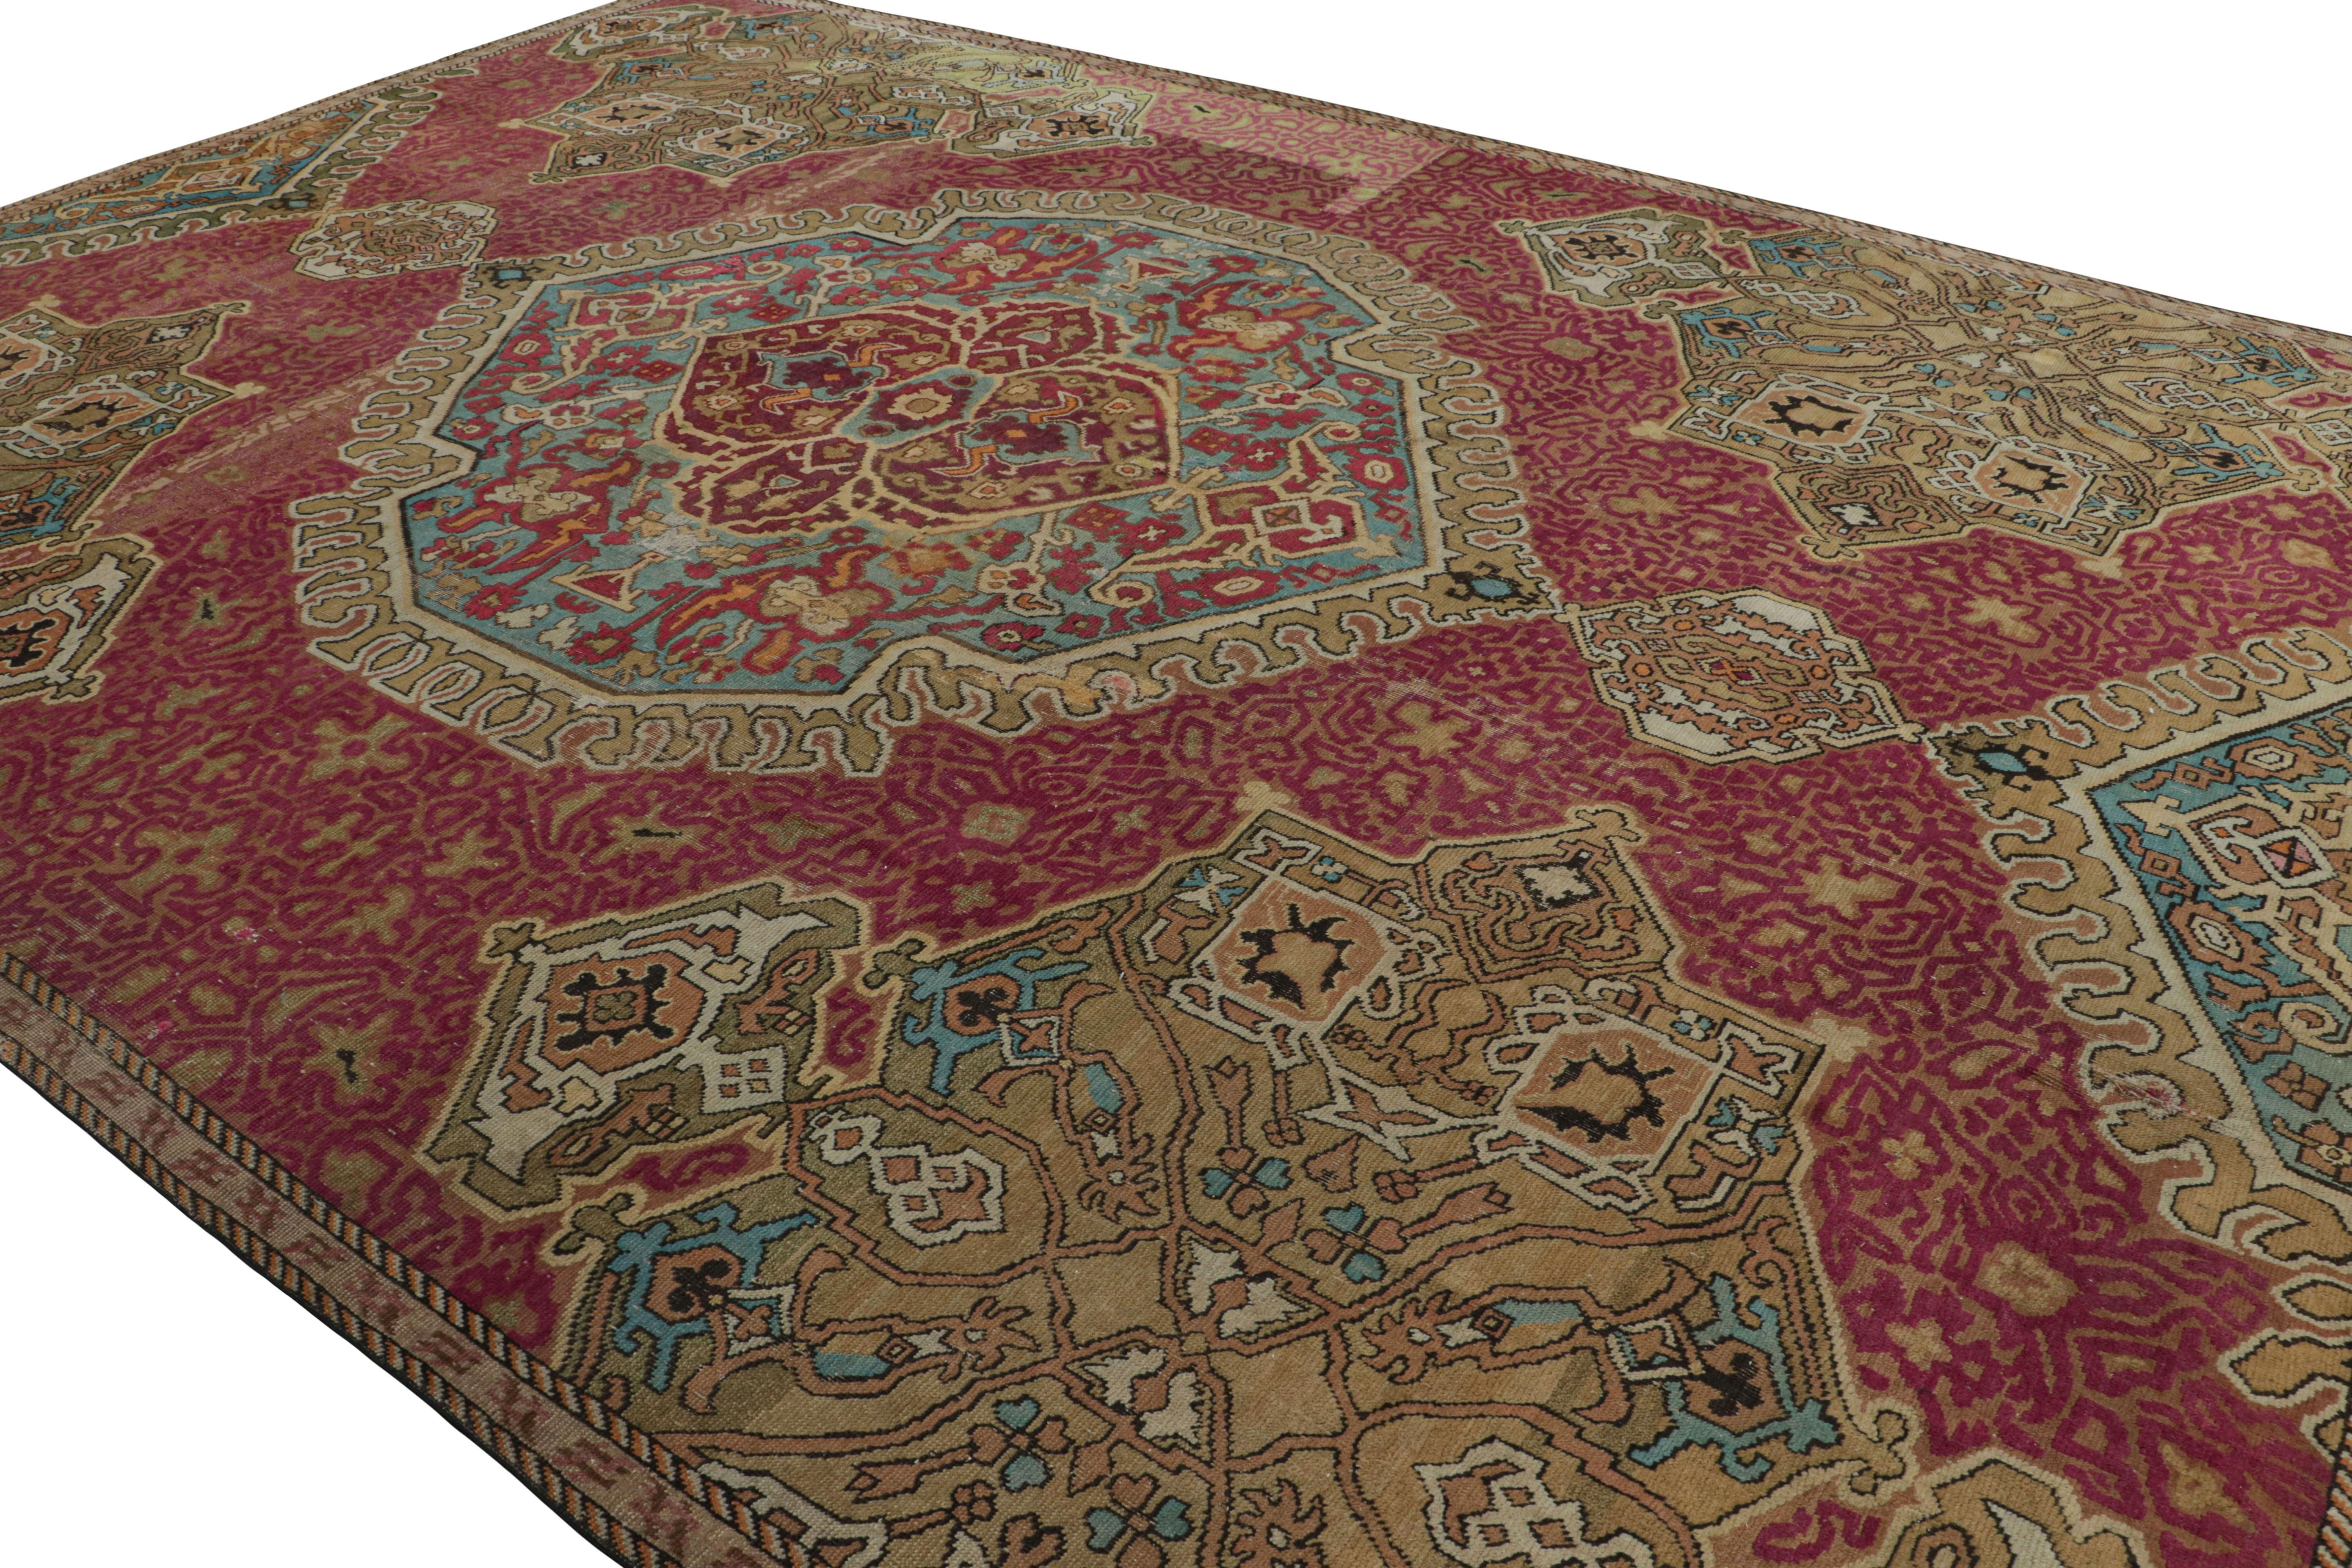 Hand-knotted in wool and originating from France circa 1740-1750, this 11x15 antique rug is a rare acquisition in both period and design—possibly among the works of Jean-Joseph Dumonds.   

On the Design: 

Connoisseurs will admire this design which